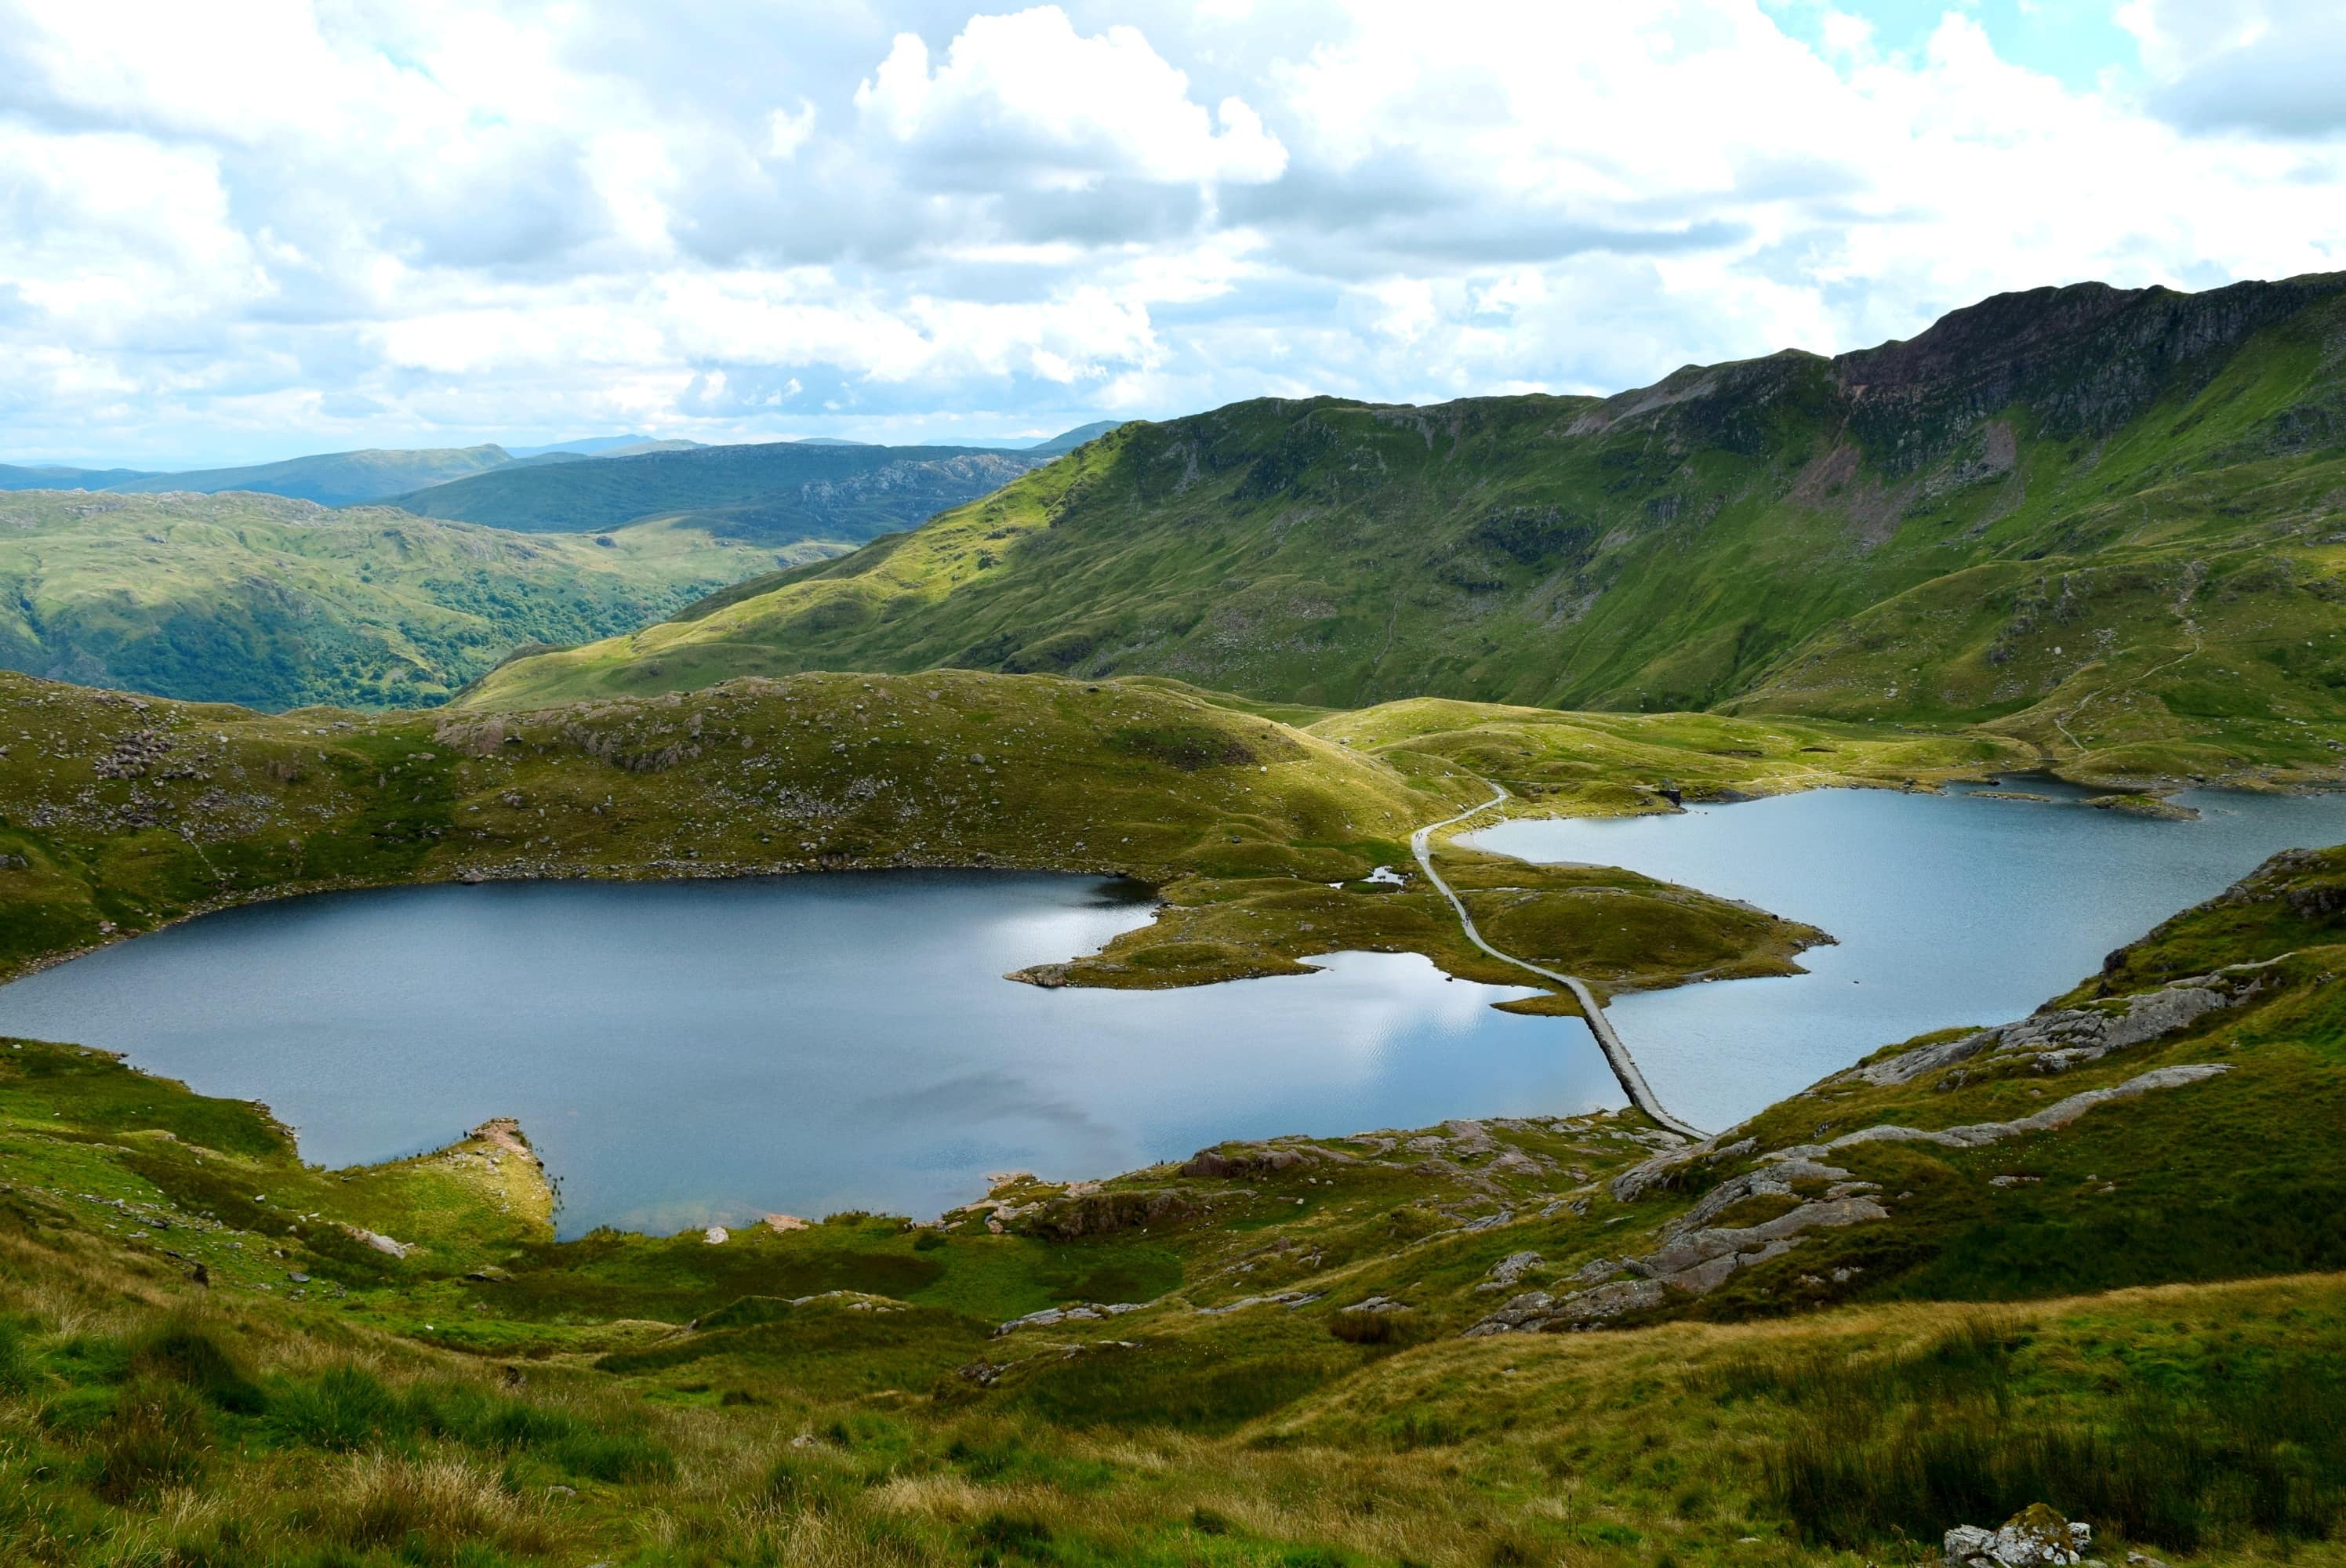 Snowdonia's landscapes – something to look forward to outside dog-friendly cottages in Wales